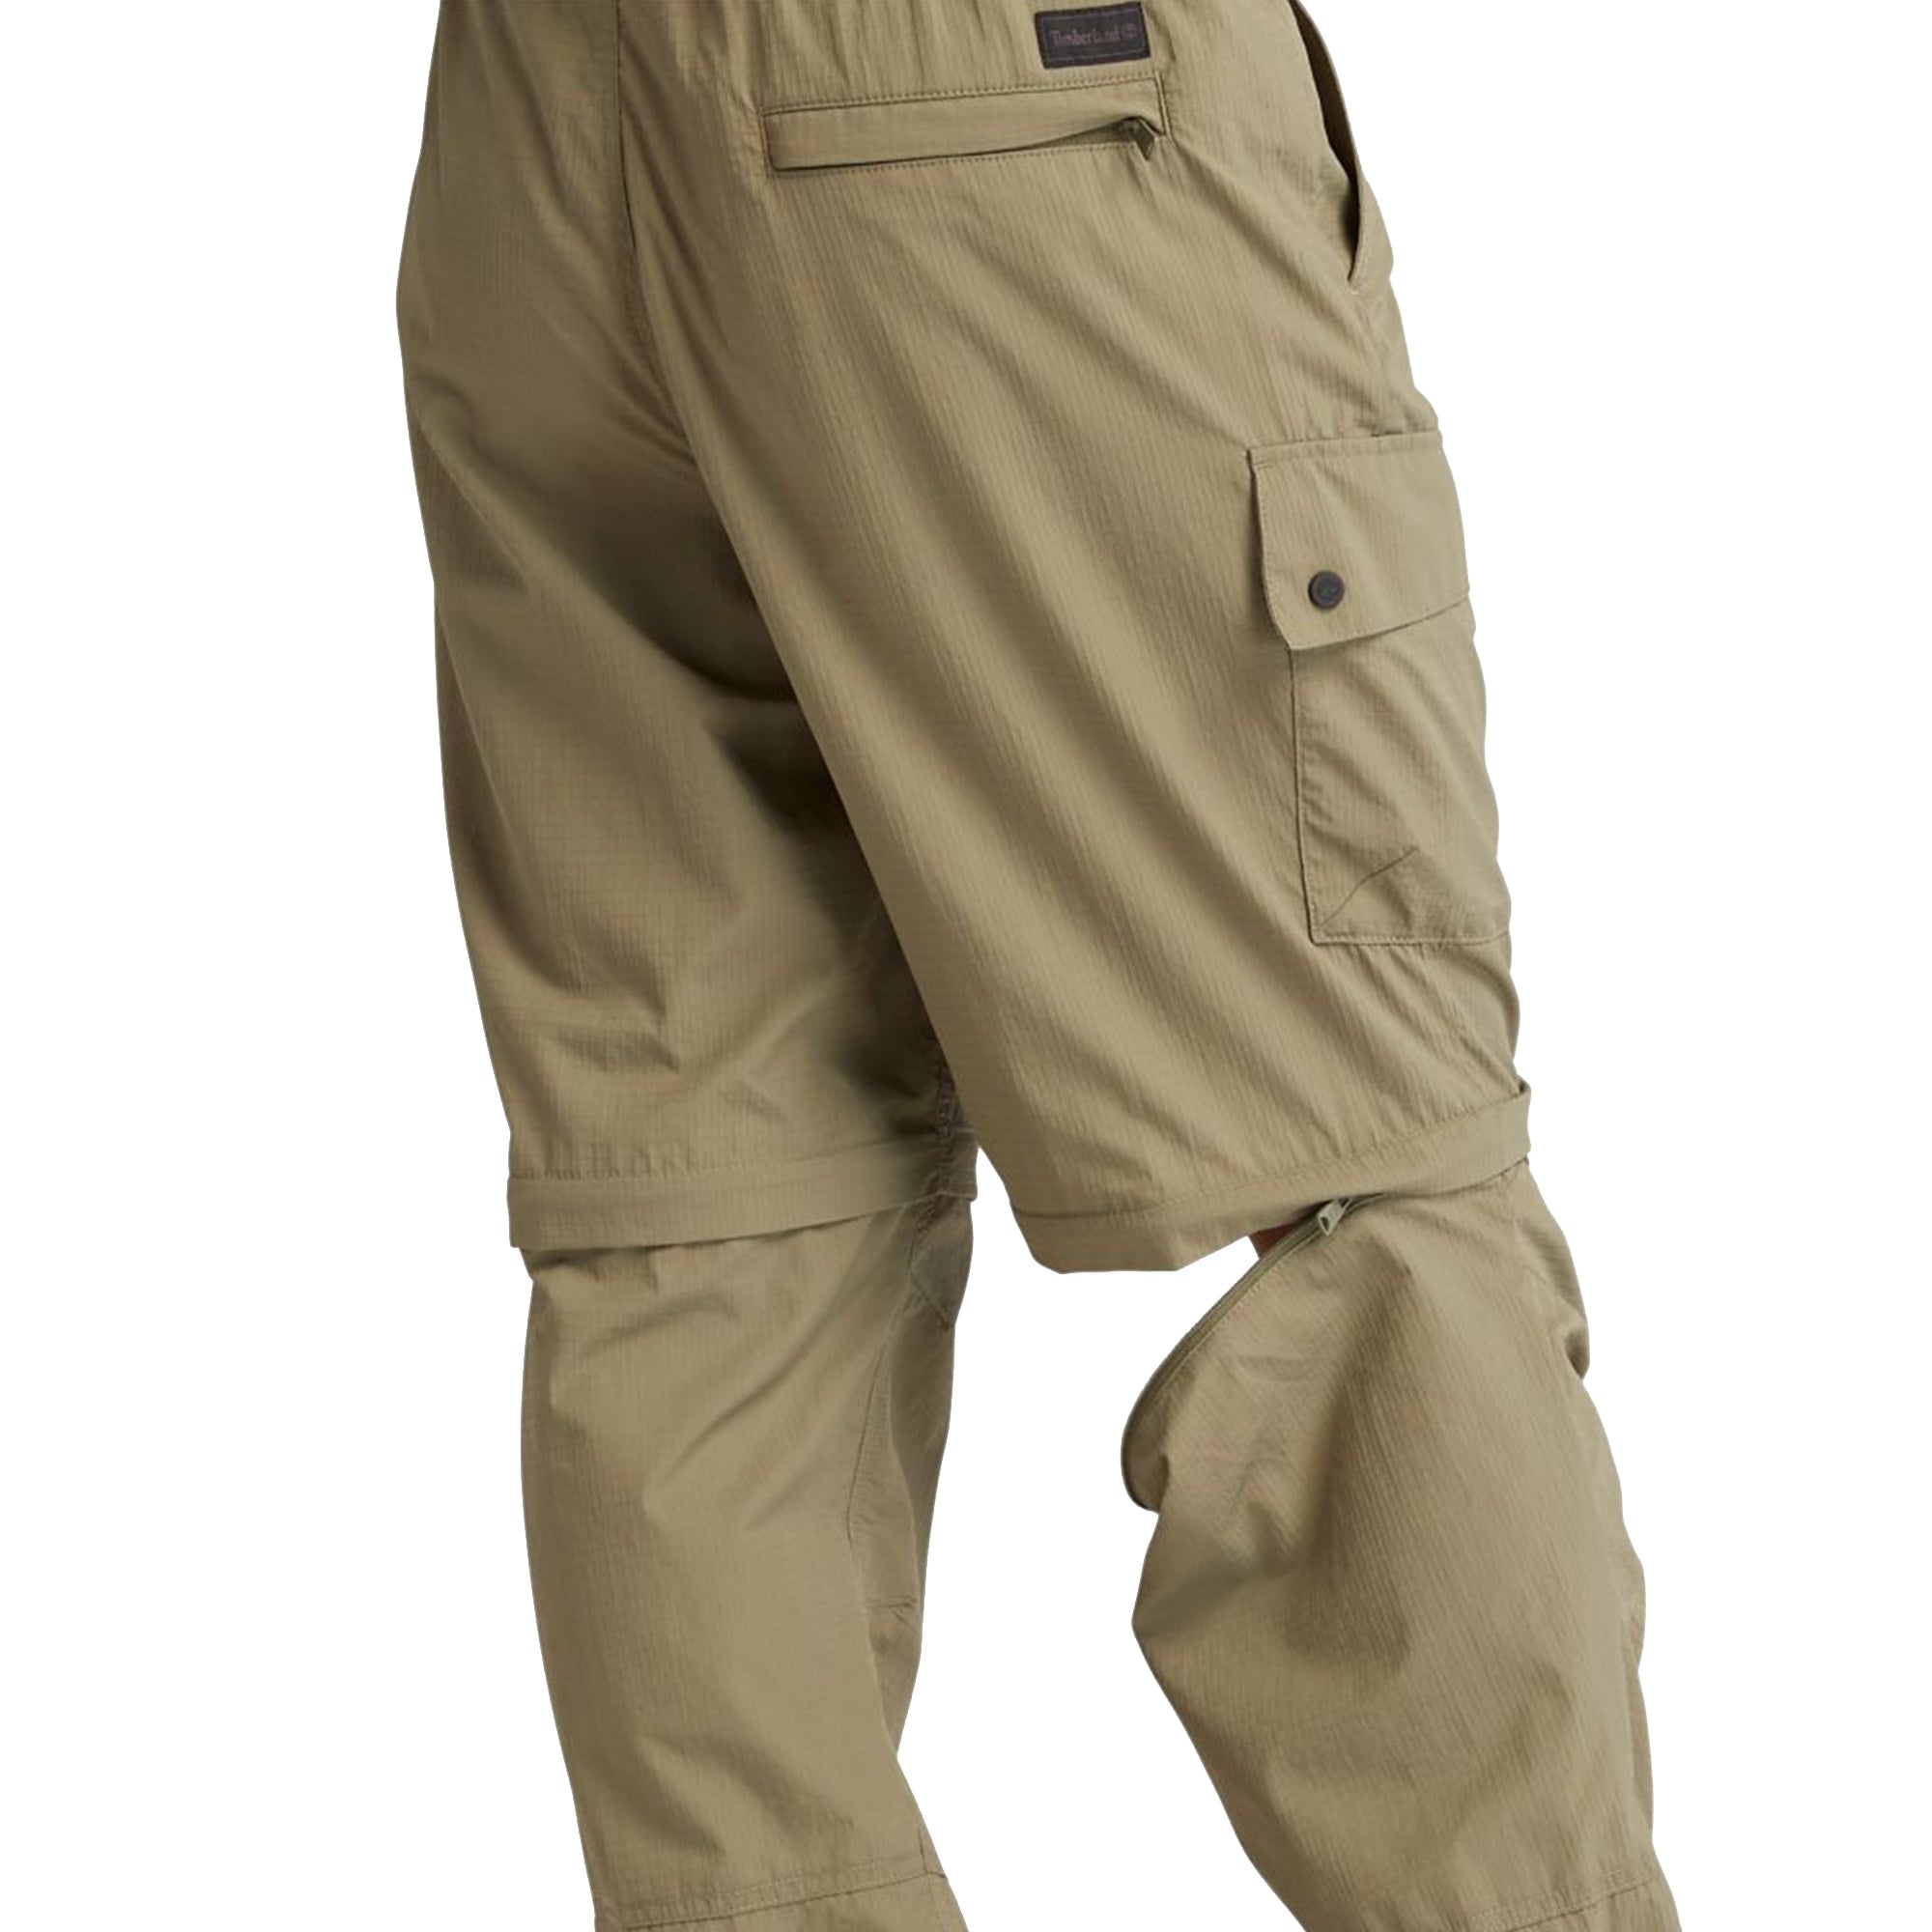 Timberland DWR 2 in 1 Outdoor Pant - Dark Sapphire